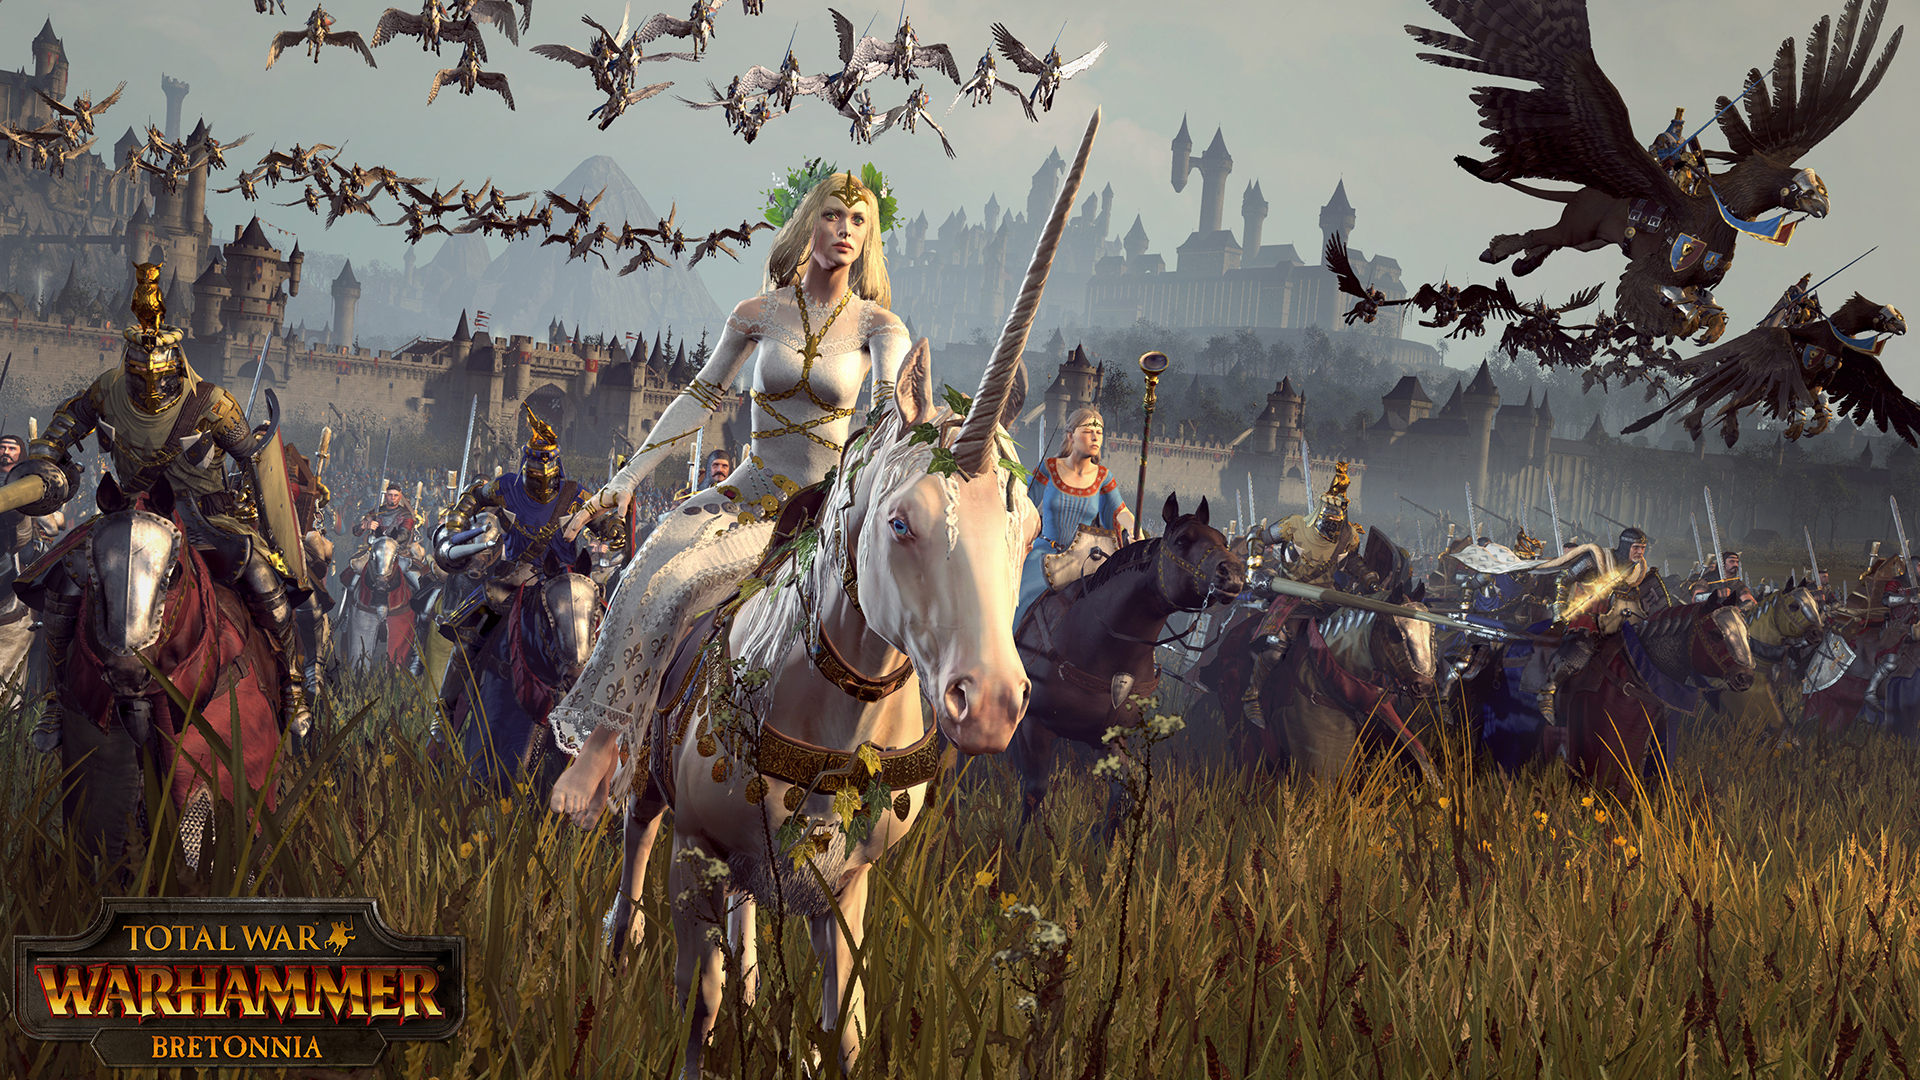 New Total War Warhammer Video Gives A Look On The Bretonnian